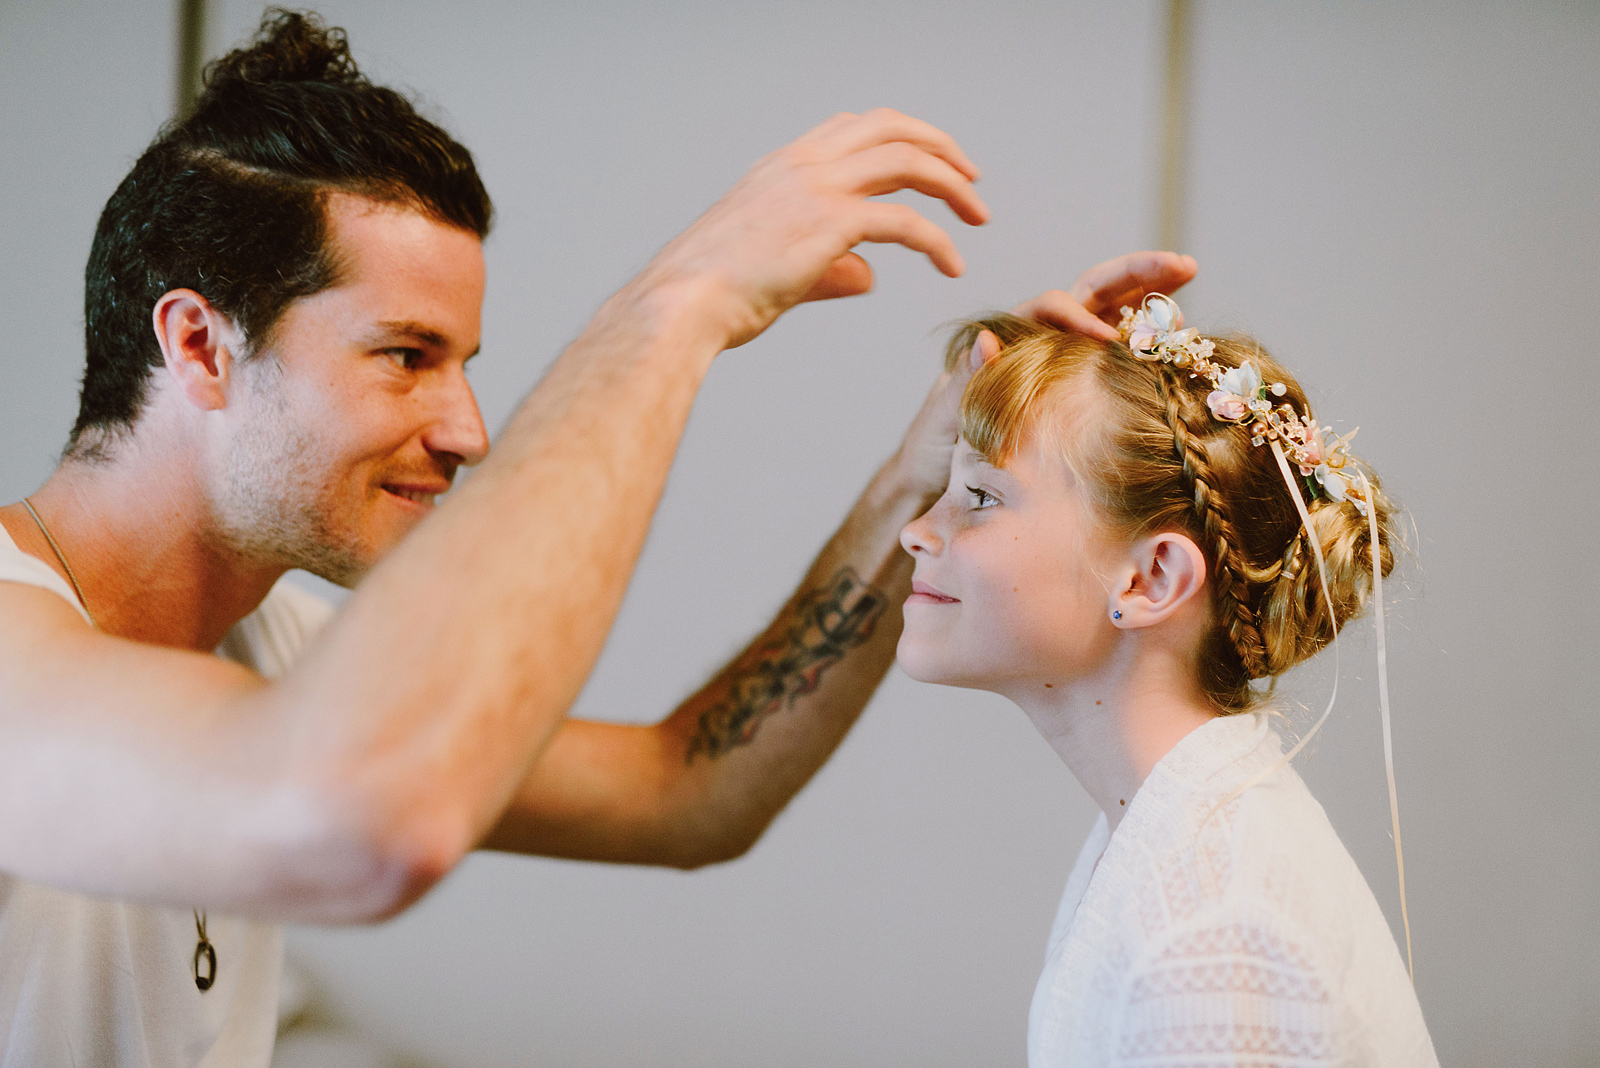 Groom putting flower crown on his daughter - Columbia Gorge River Wedding in Oregon